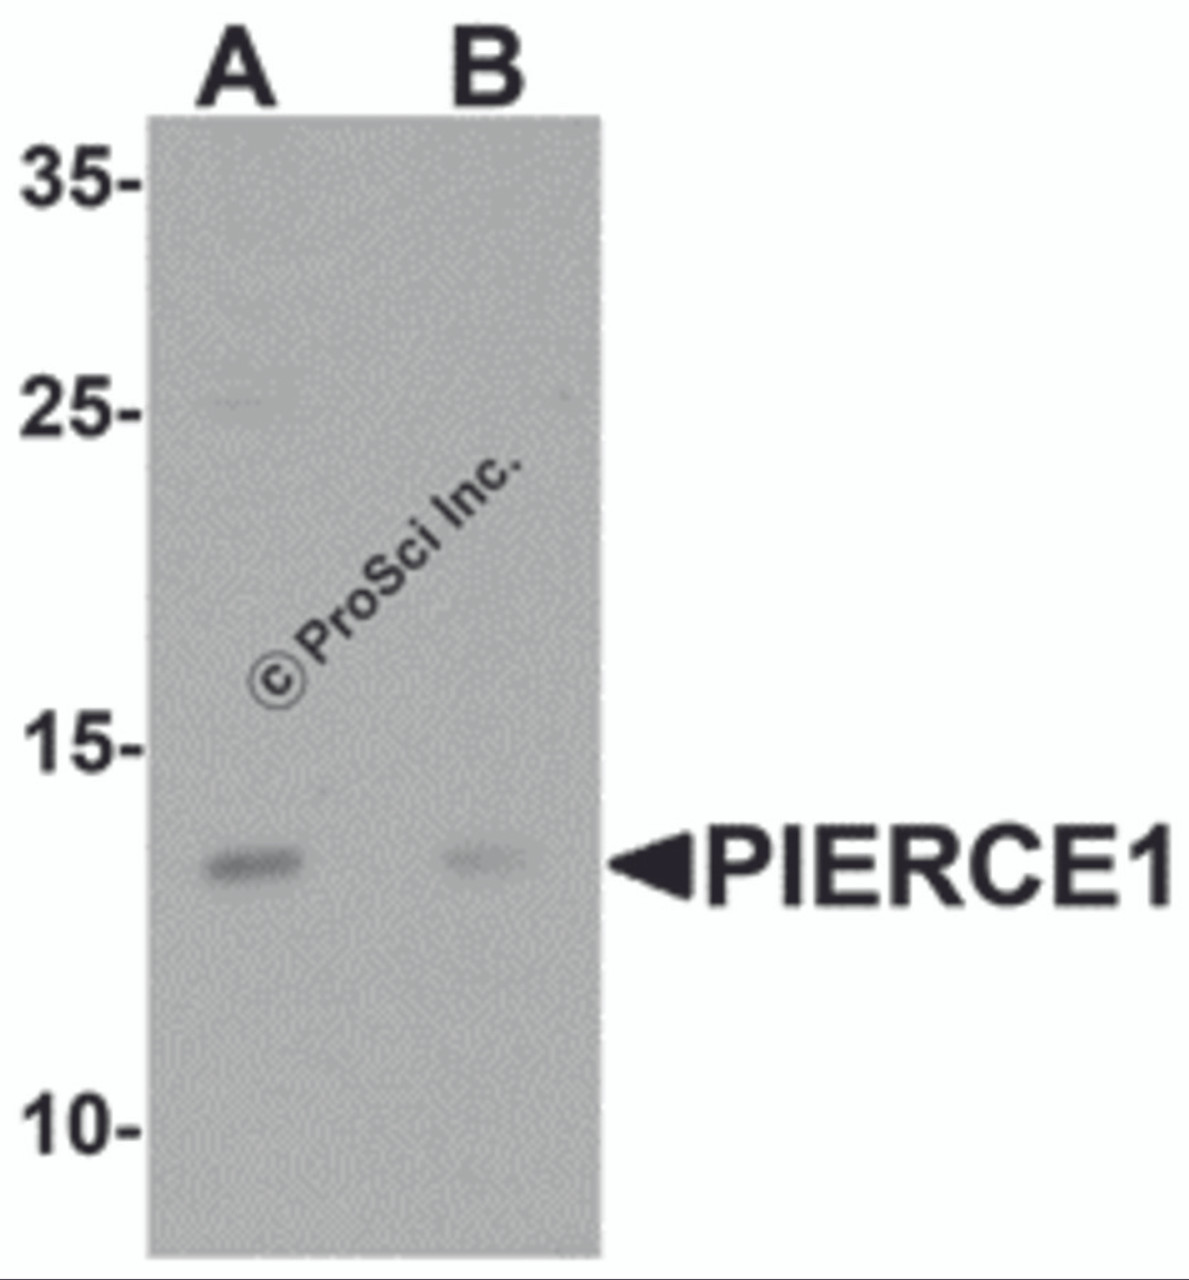 Western blot analysis of PIERCE1 in A20 cell lysate with PIERCE1 antibody at 1 &#956;g/mL in (A) the absence and (B) the presence of blocking peptide.